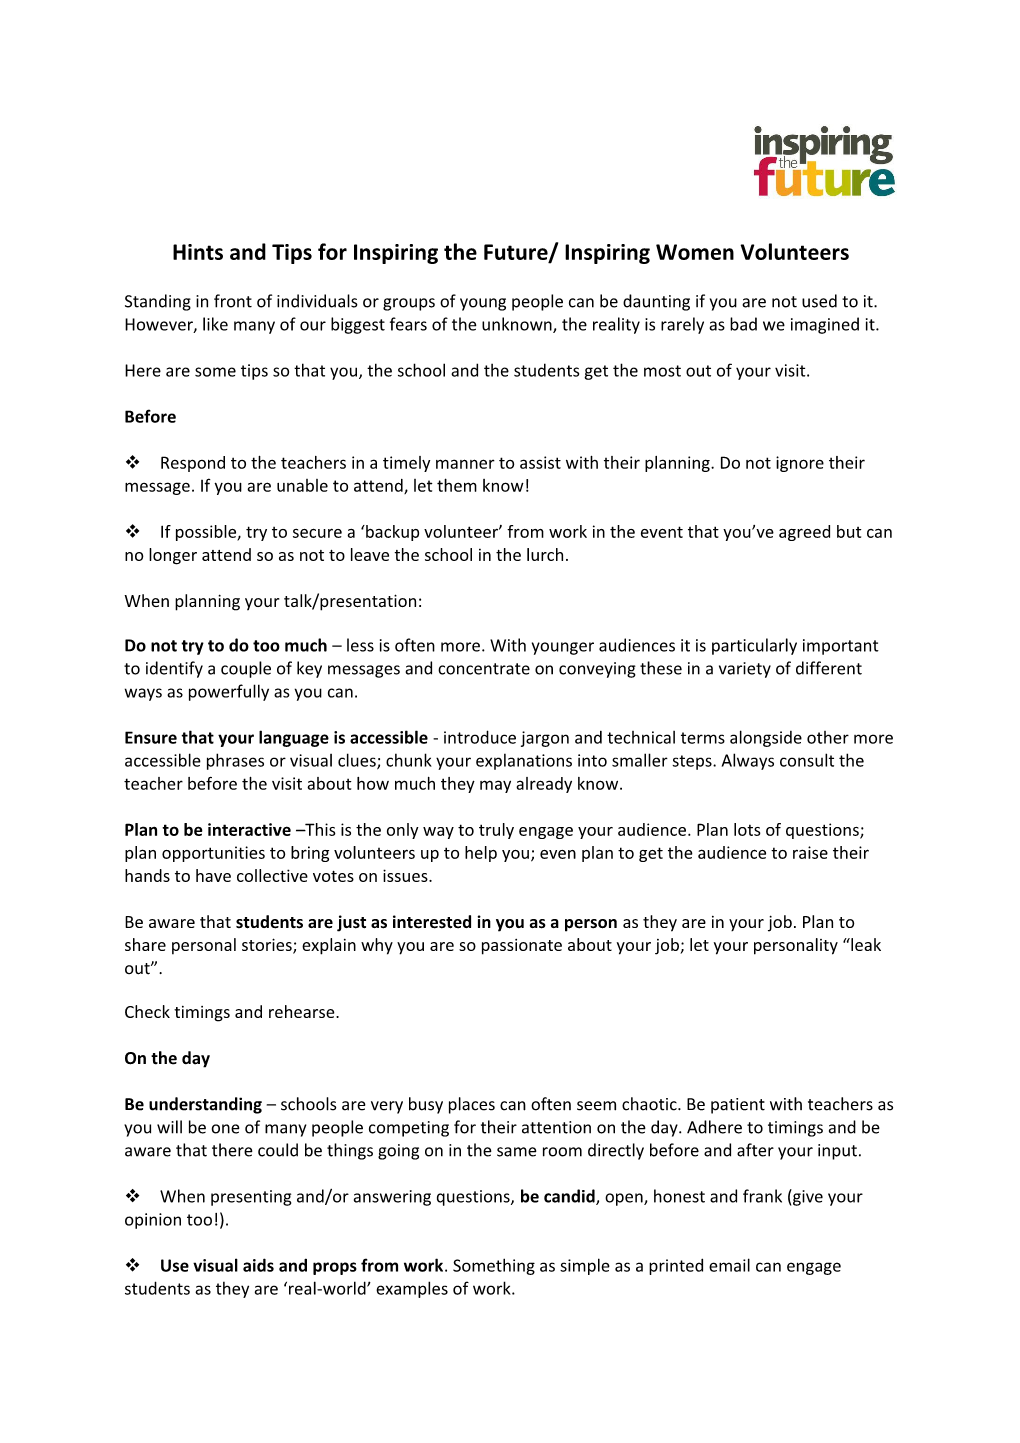 Hints and Tips for Inspiring the Future/ Inspiring Women Volunteers